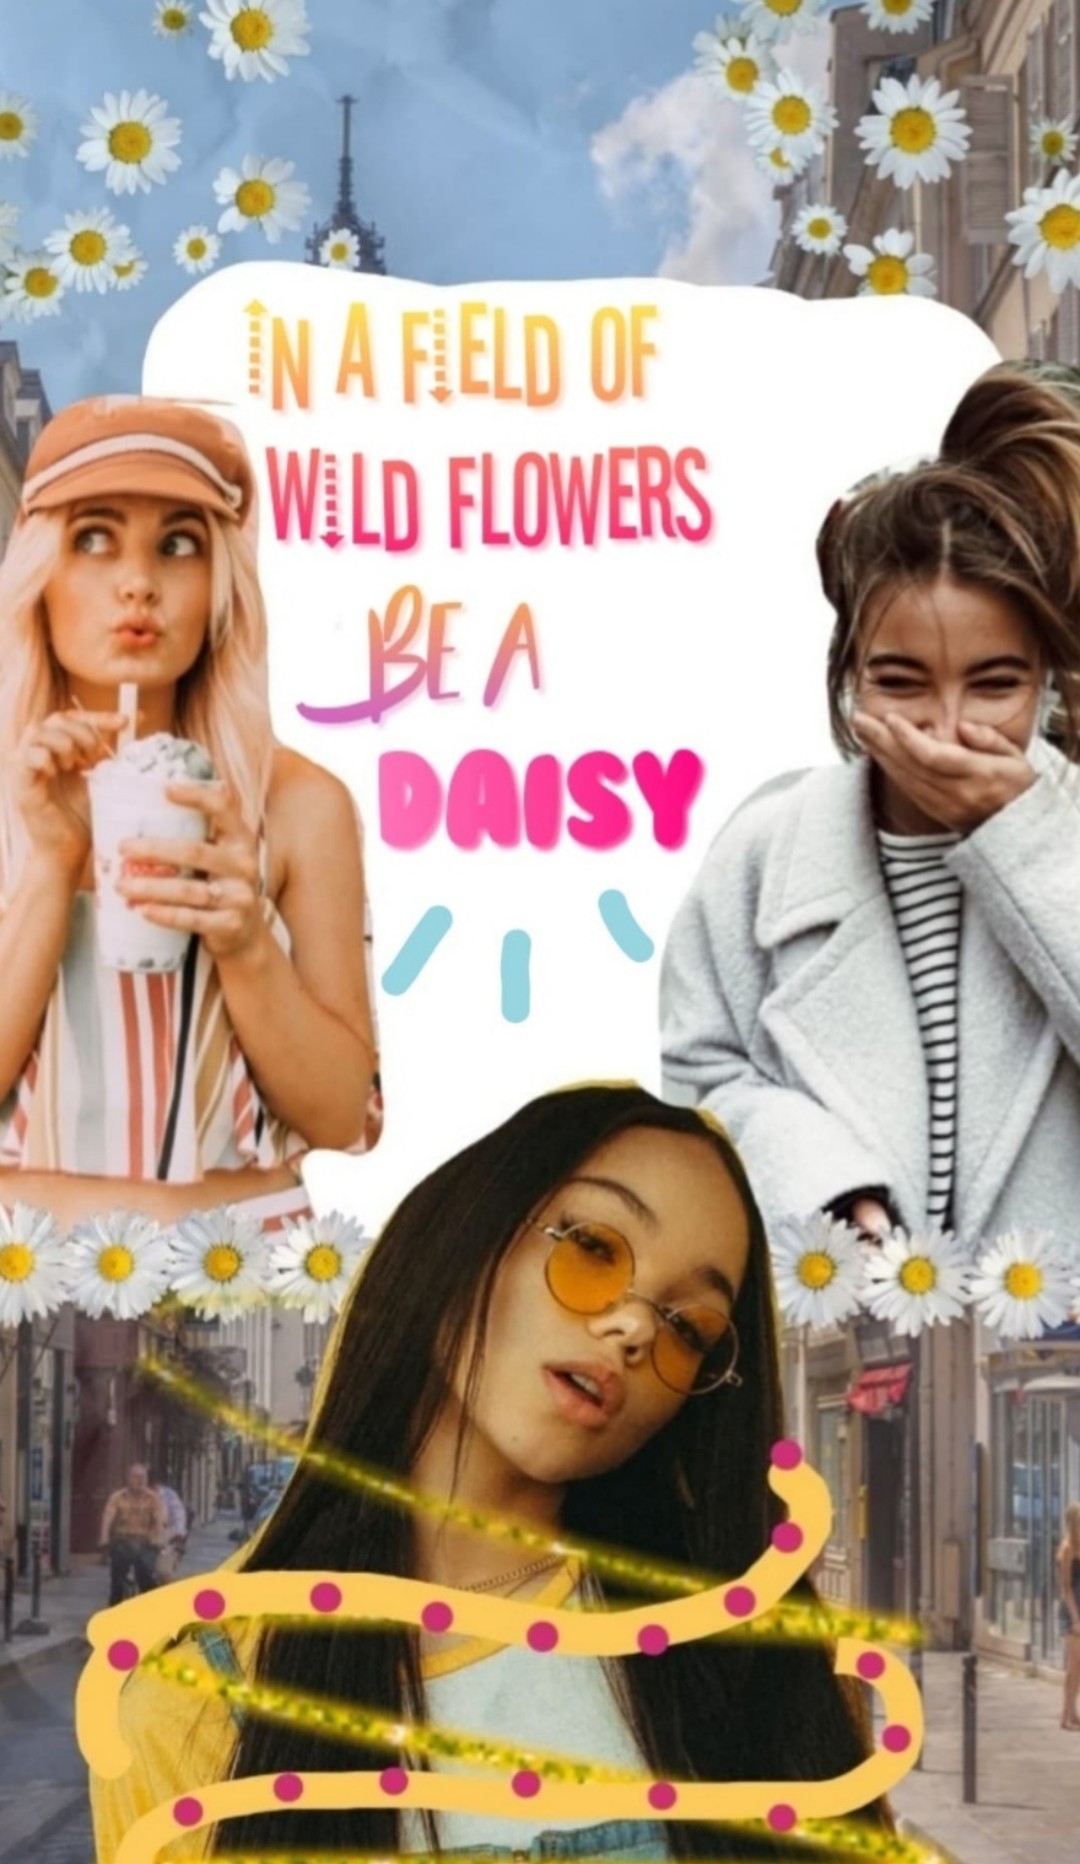 🌼Tap🌼
My entry to -sunflowers-extras games. Go Team Daisy!